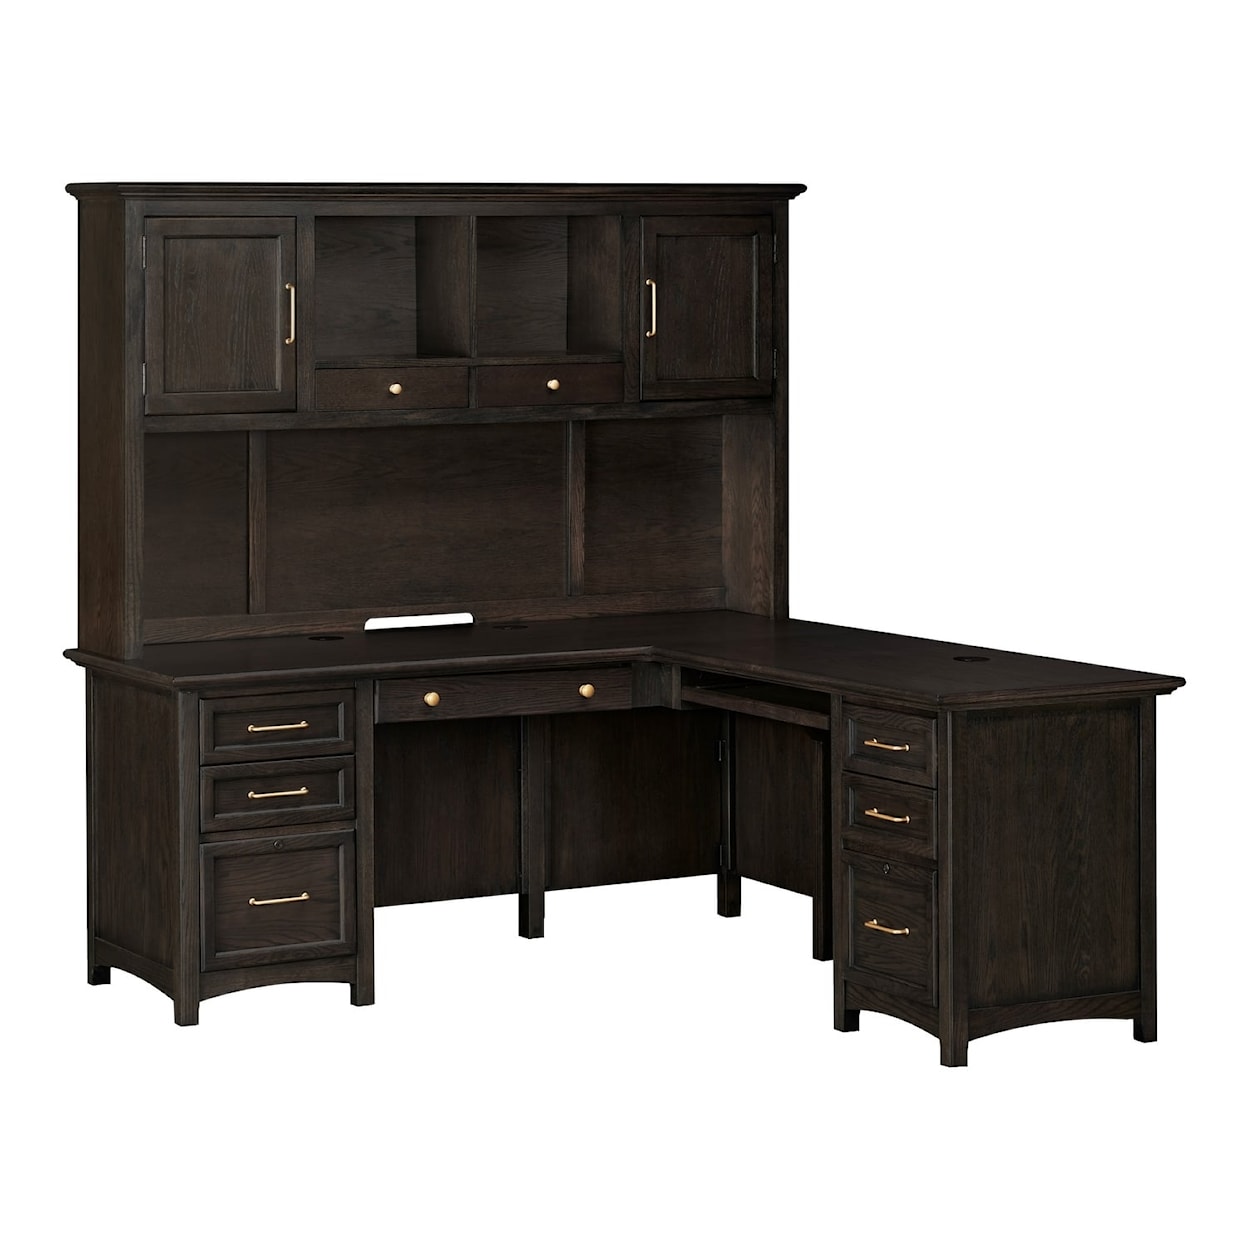 Winners Only Addison Credenza & Hutch